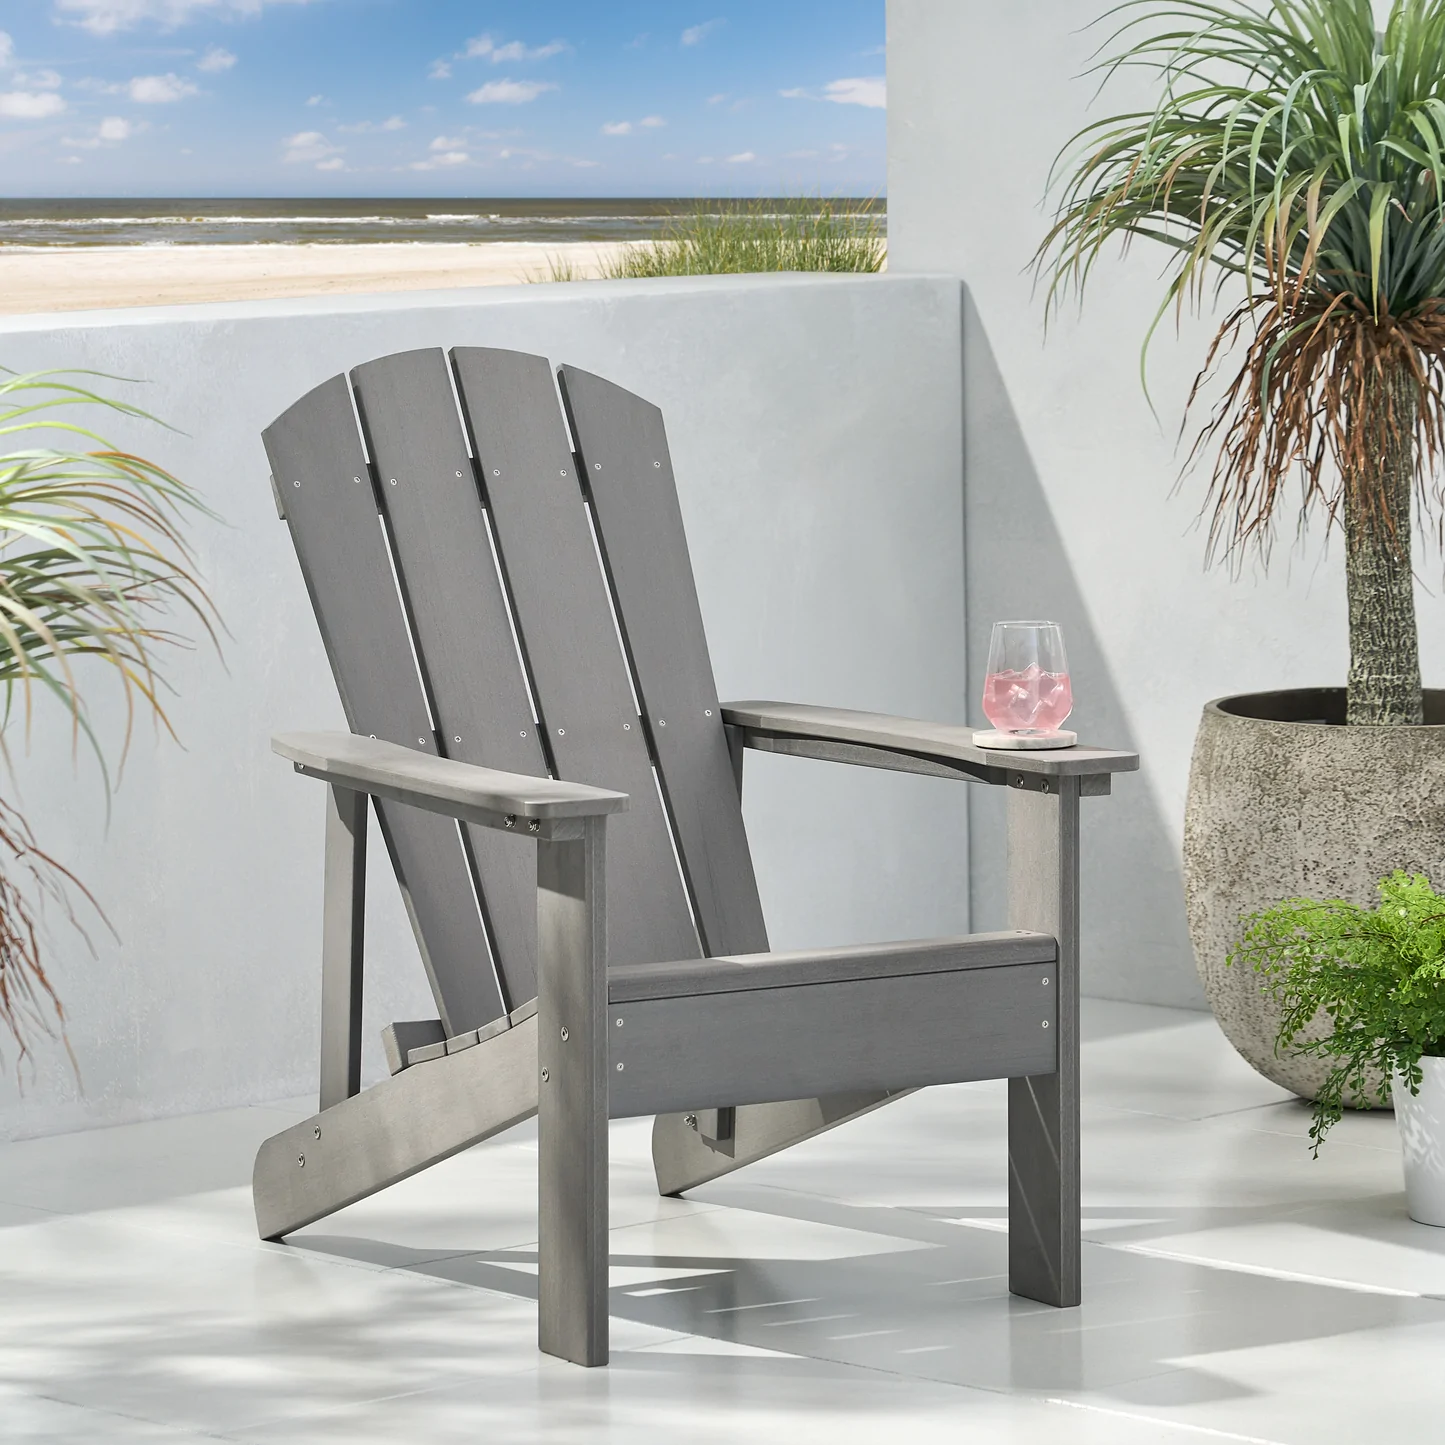 LANTRO JS Classic Solid Gray Outdoor Solid Wood Adirondack Chair Garden Lounge Chair - image 1 of 8